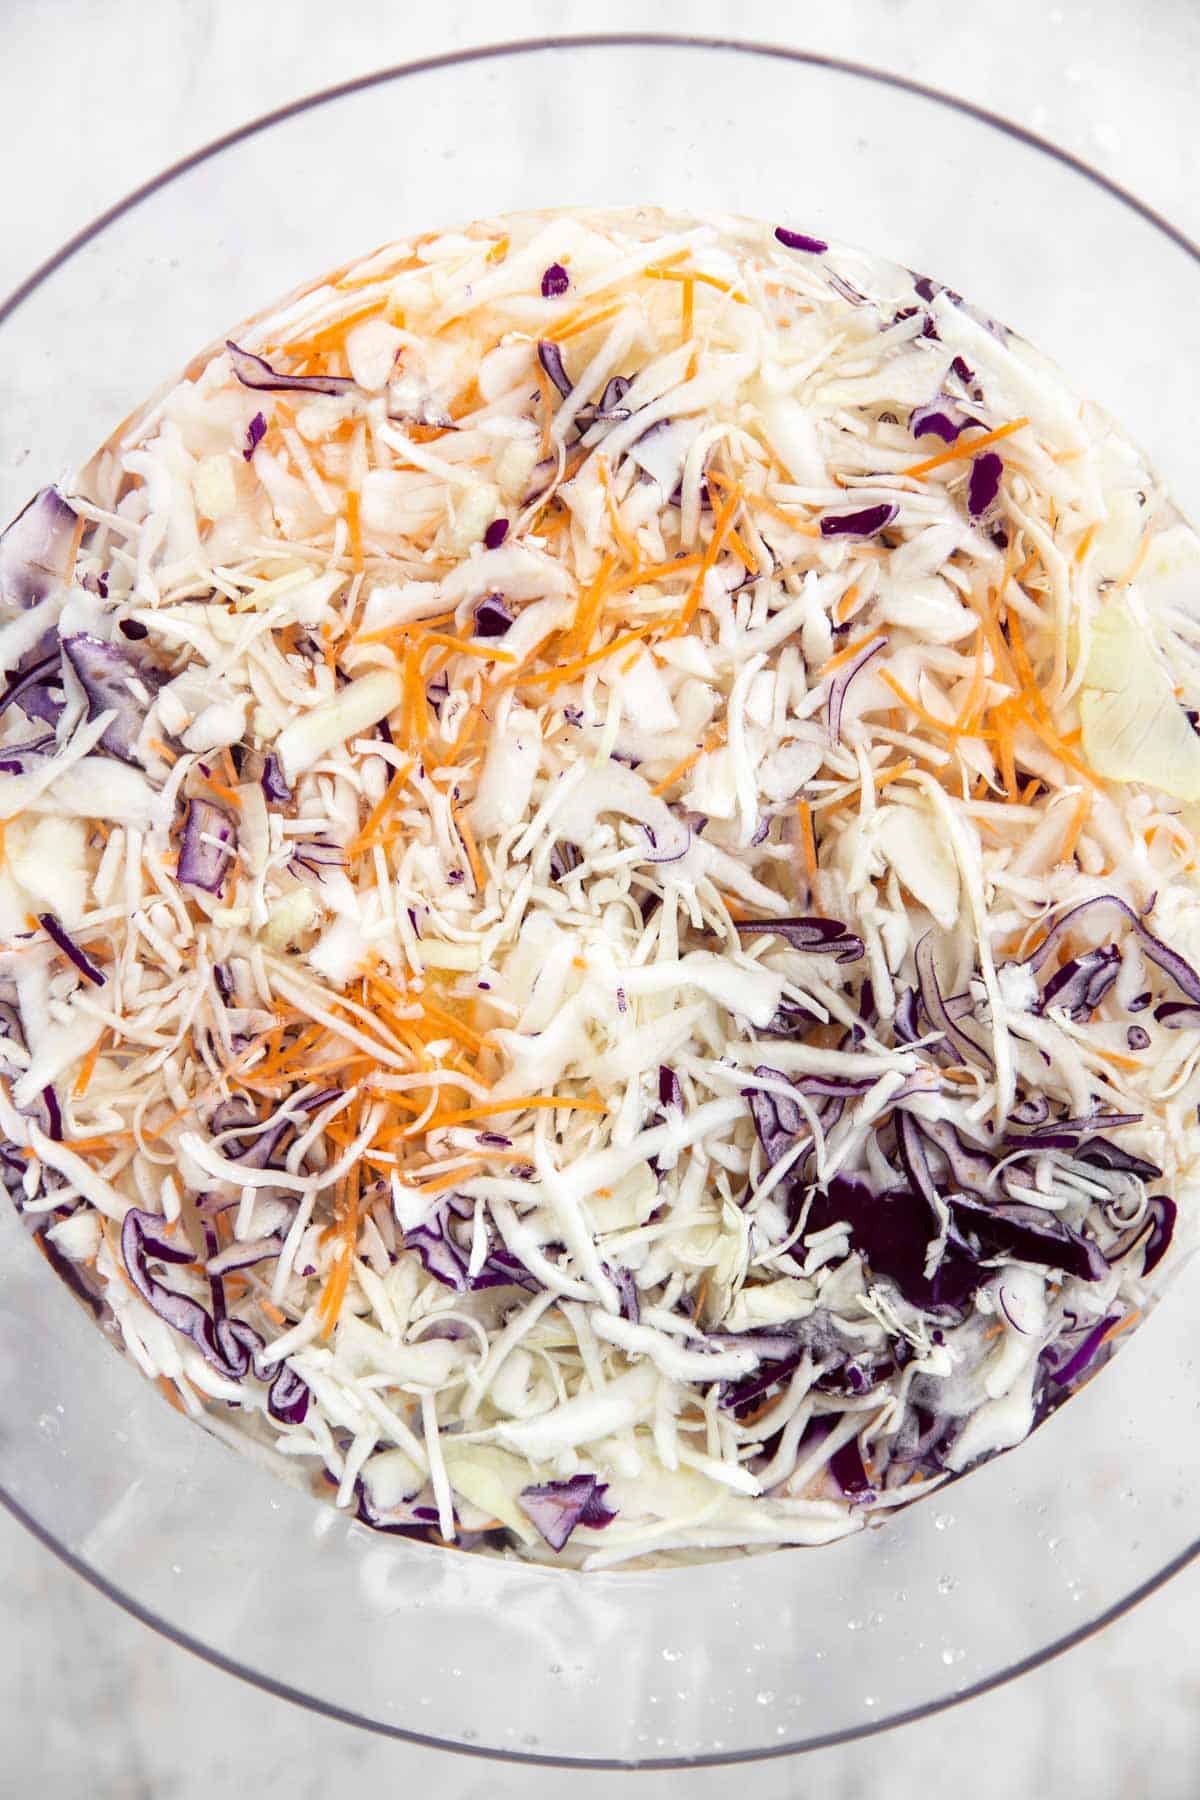 coleslaw mix soaking in water in glass bowl